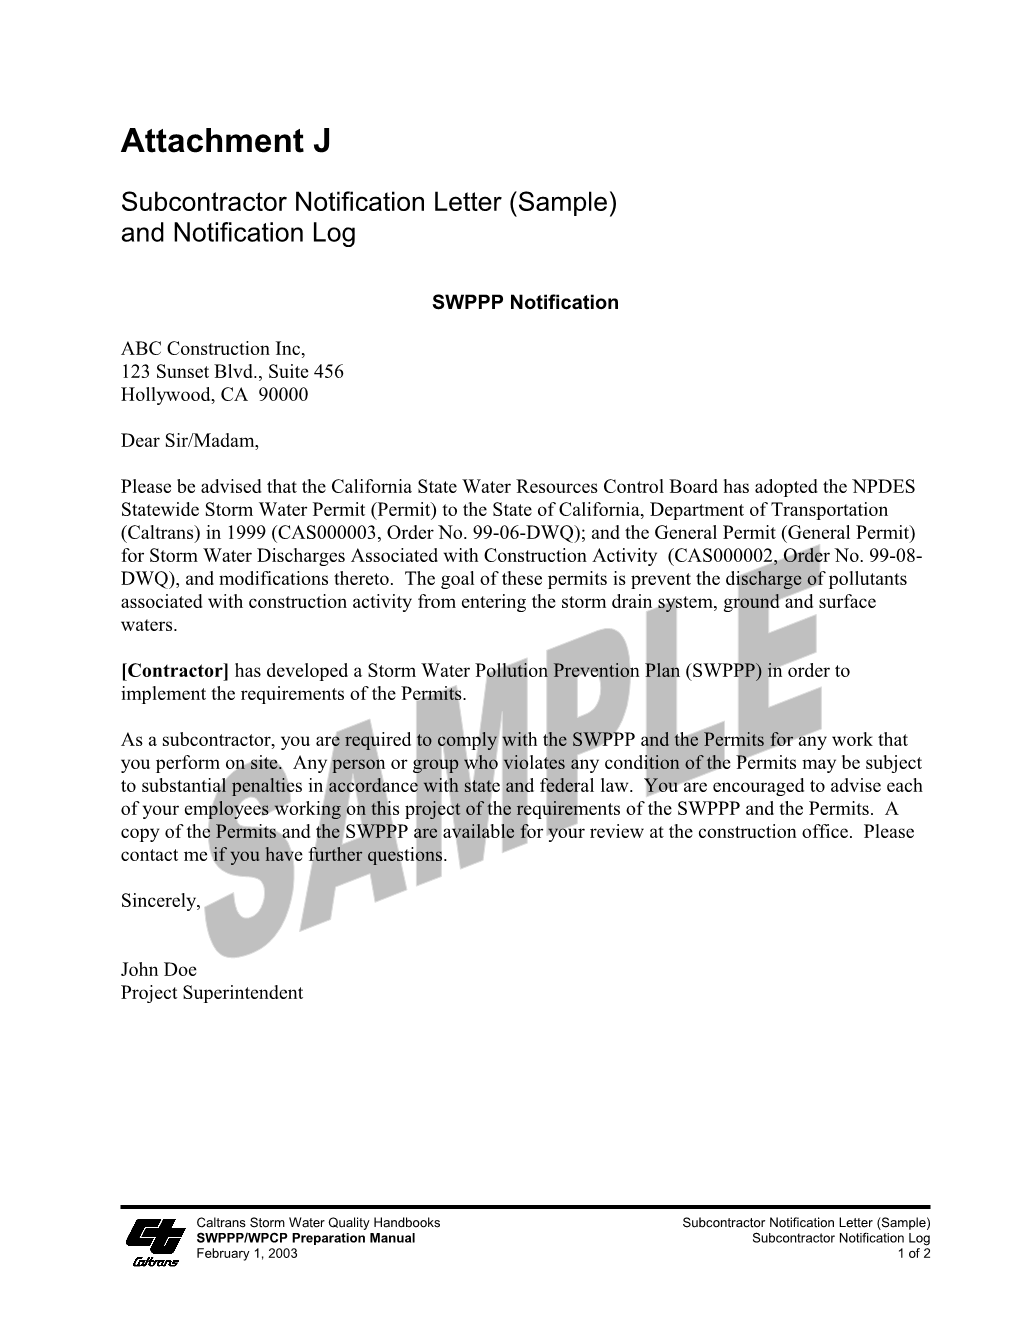 Subcontractor Notification Letter (Sample) and Notification Log